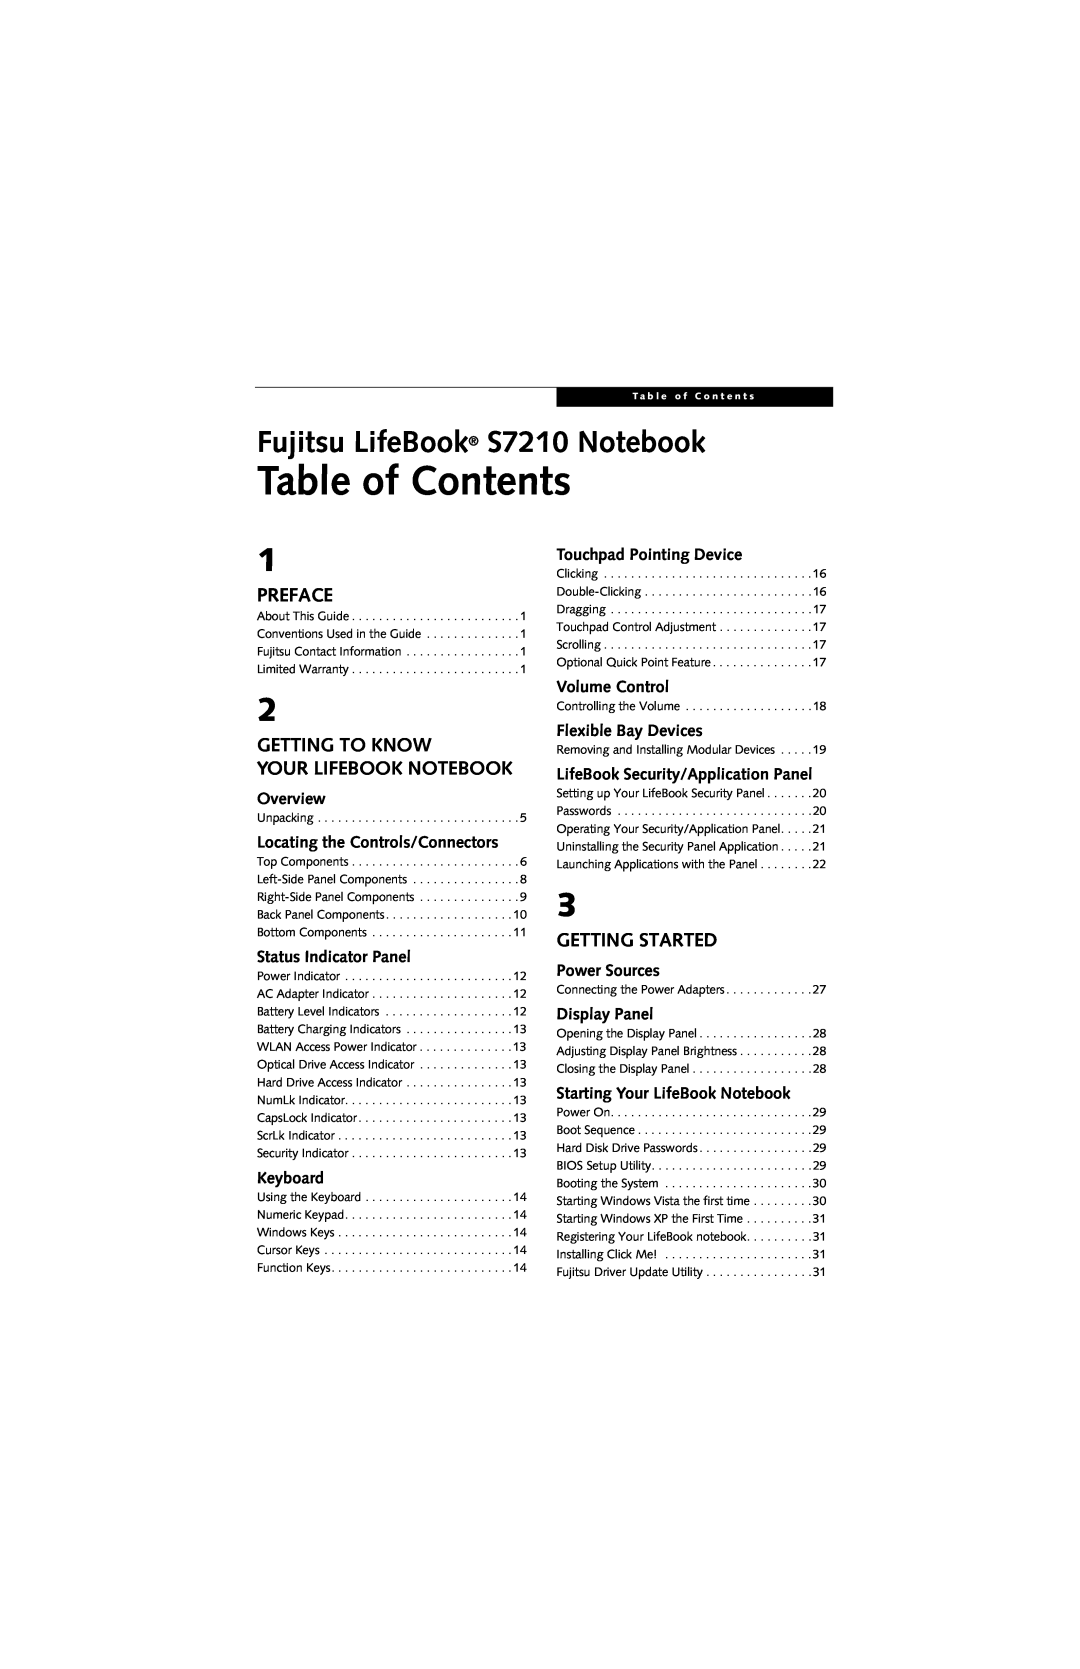 Fujitsu S7210 Table of Contents, Preface, Getting To Know Your Lifebook Notebook, Getting Started, Overview, Keyboard 